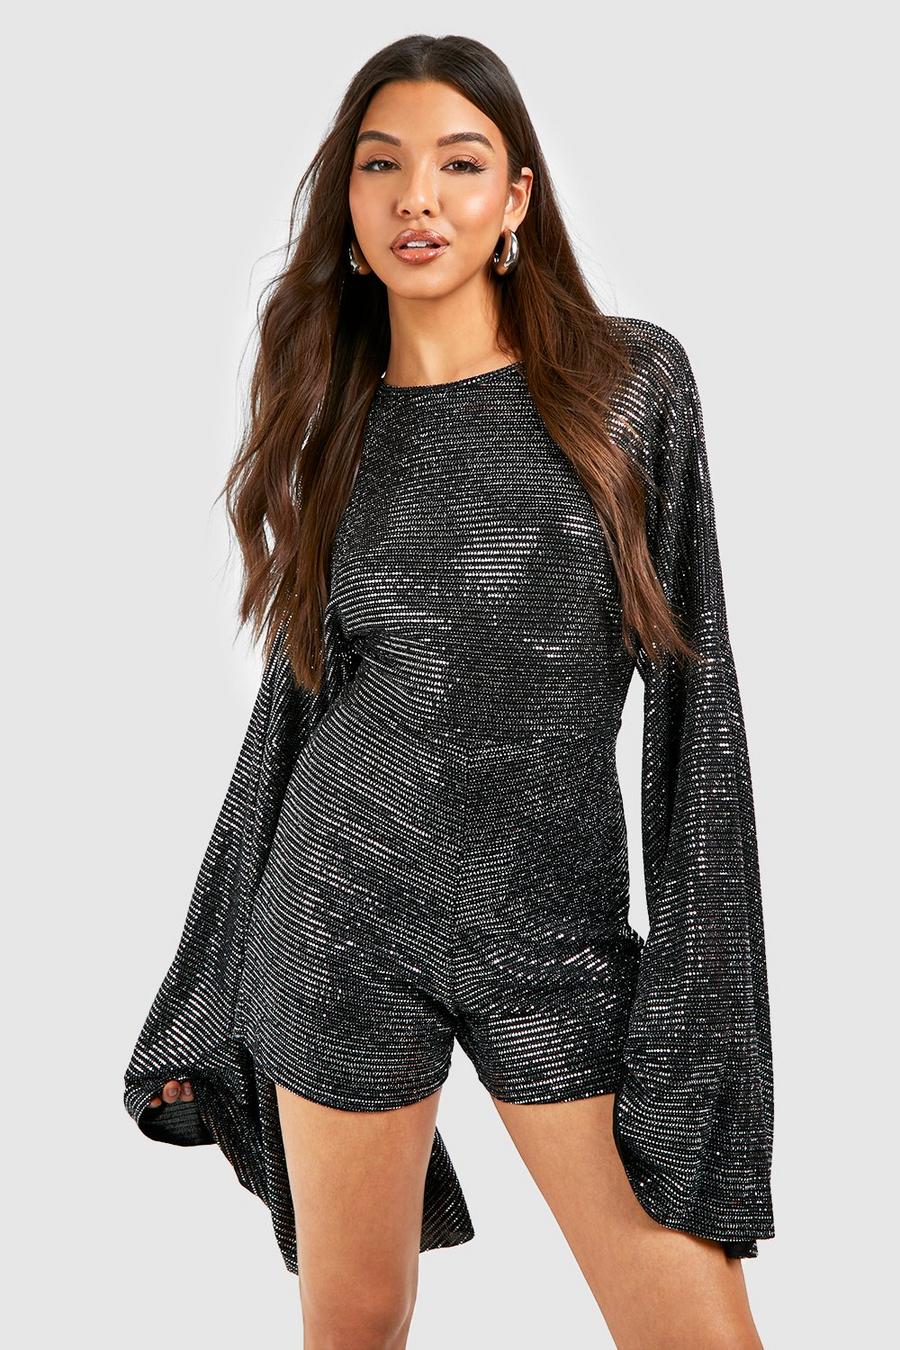 Silver Sequin Extreme Flare Sleeve Romper